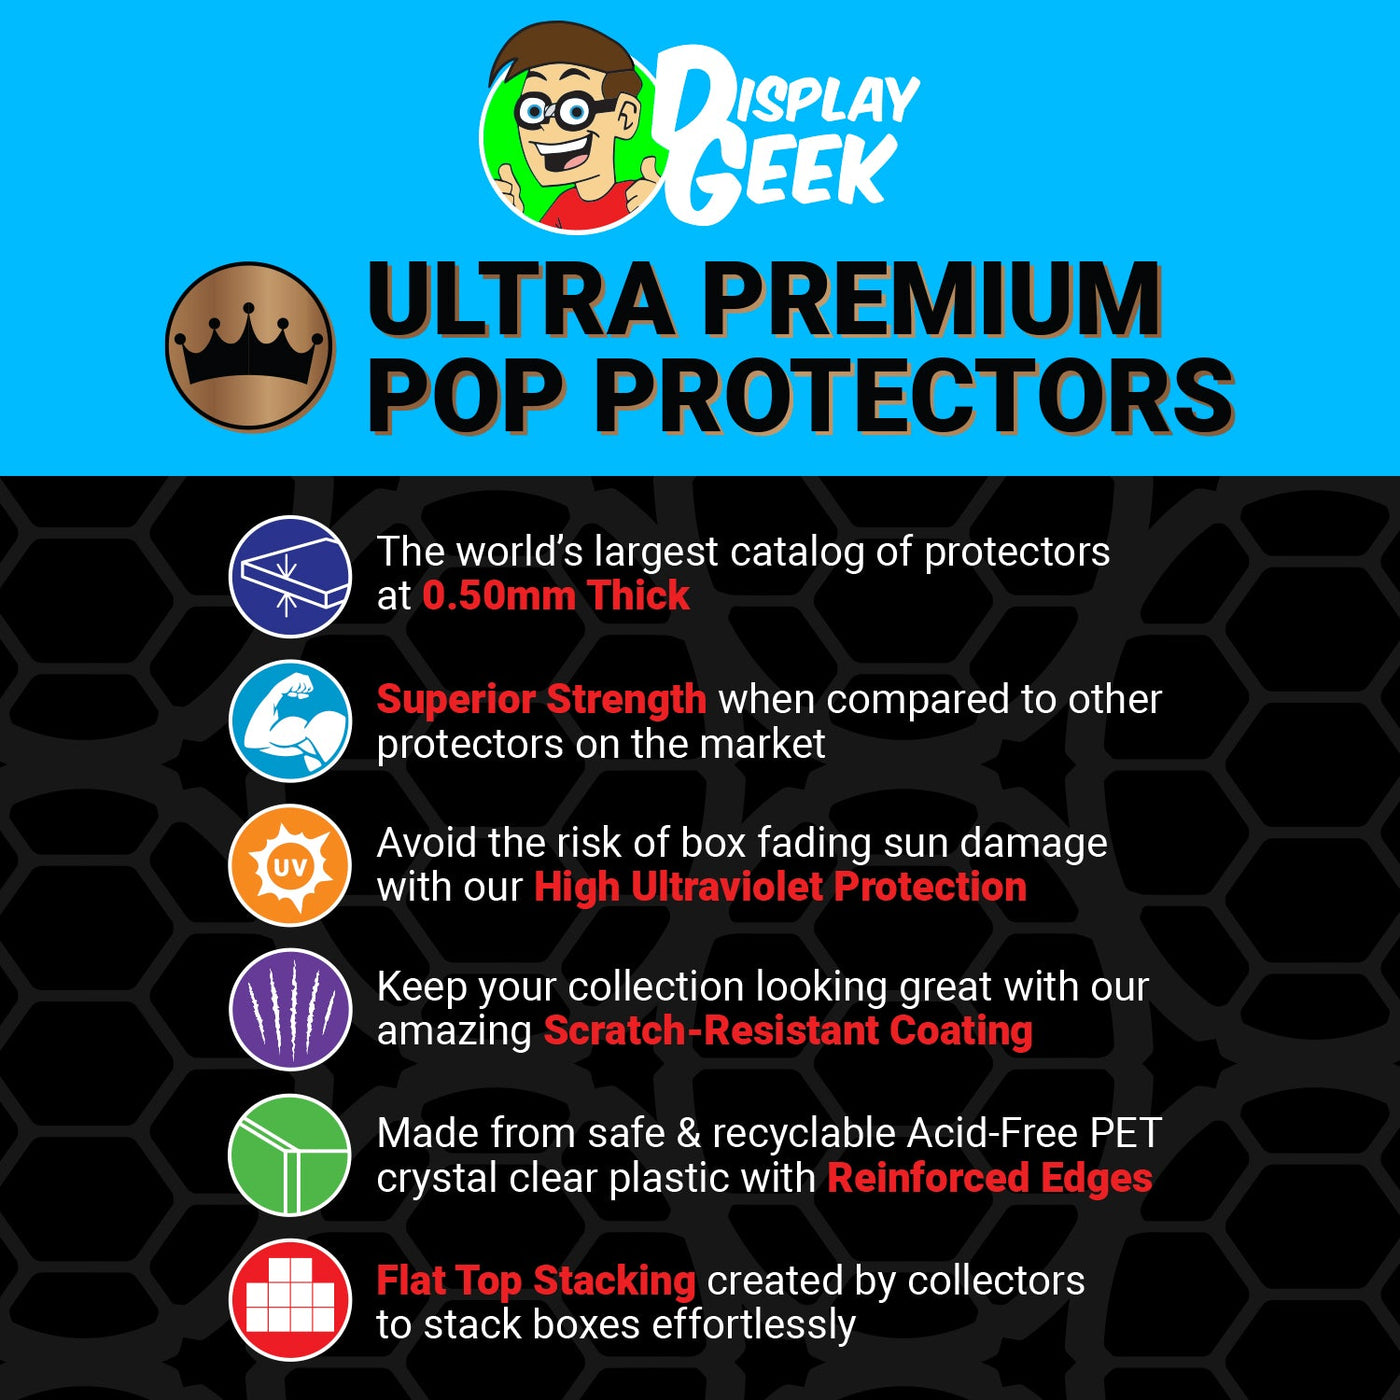 Pop Protector for Wall-E & Eve #1119 Funko Pop Moment on The Protector Guide App by Display Geek